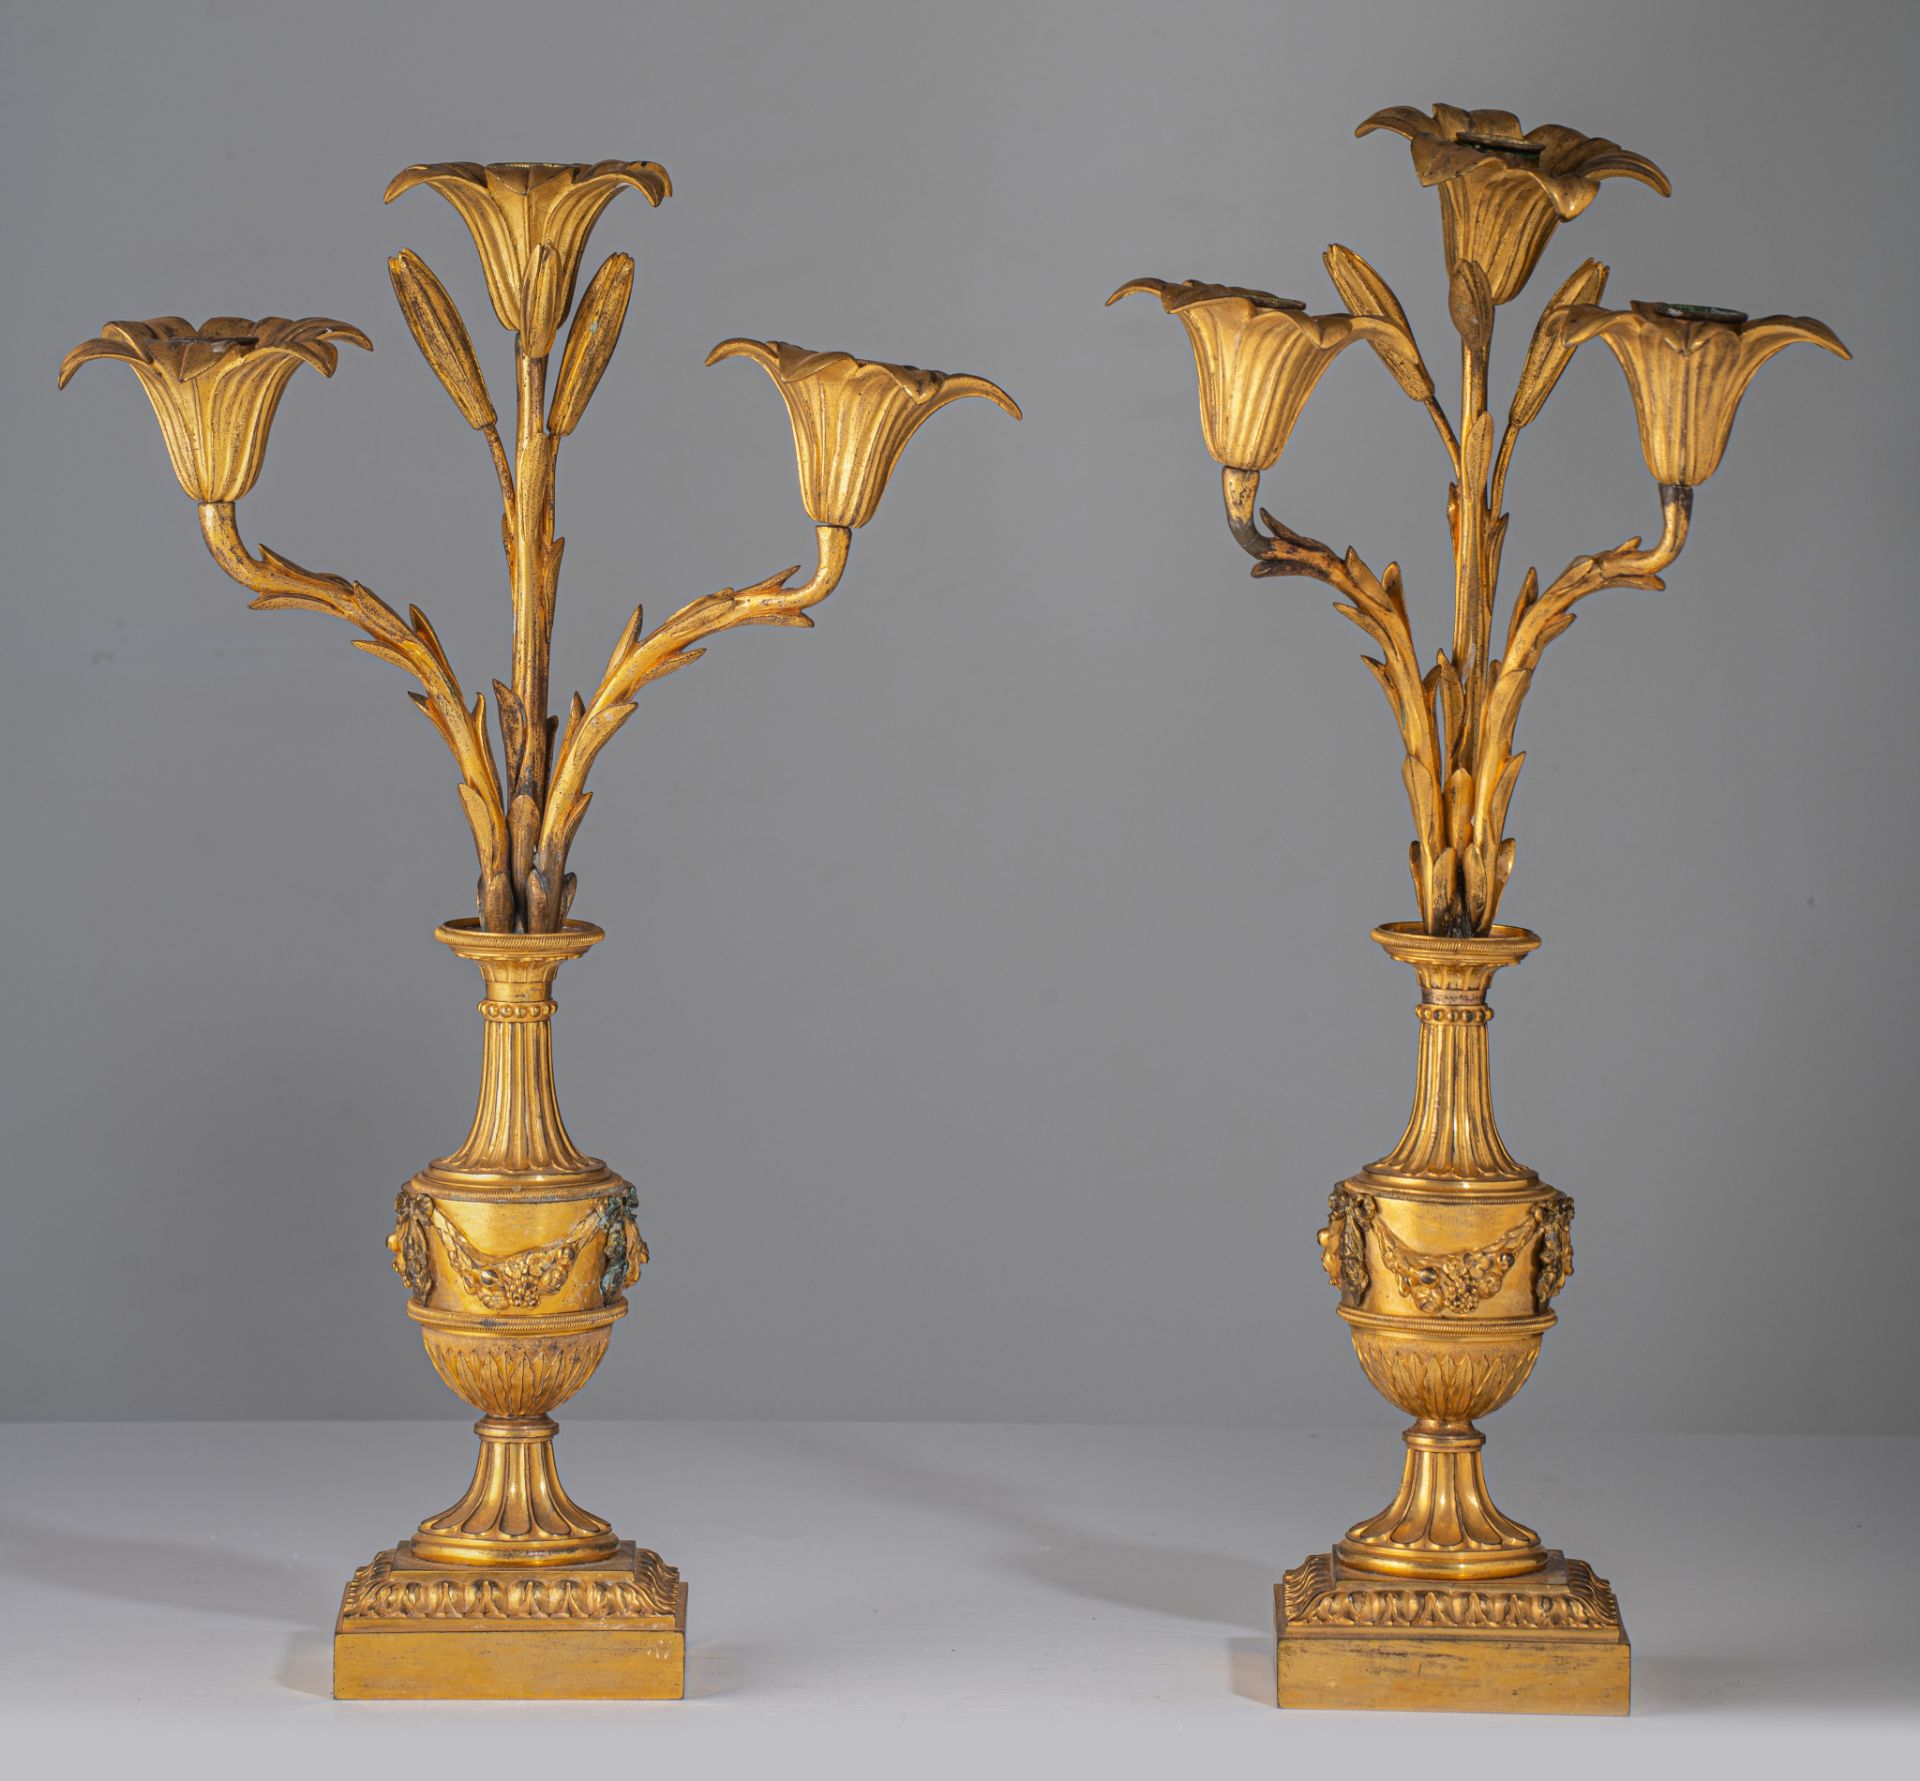 A pair of Neoclassical gilt bronze floral candelabras, H 48 cm - Image 2 of 6